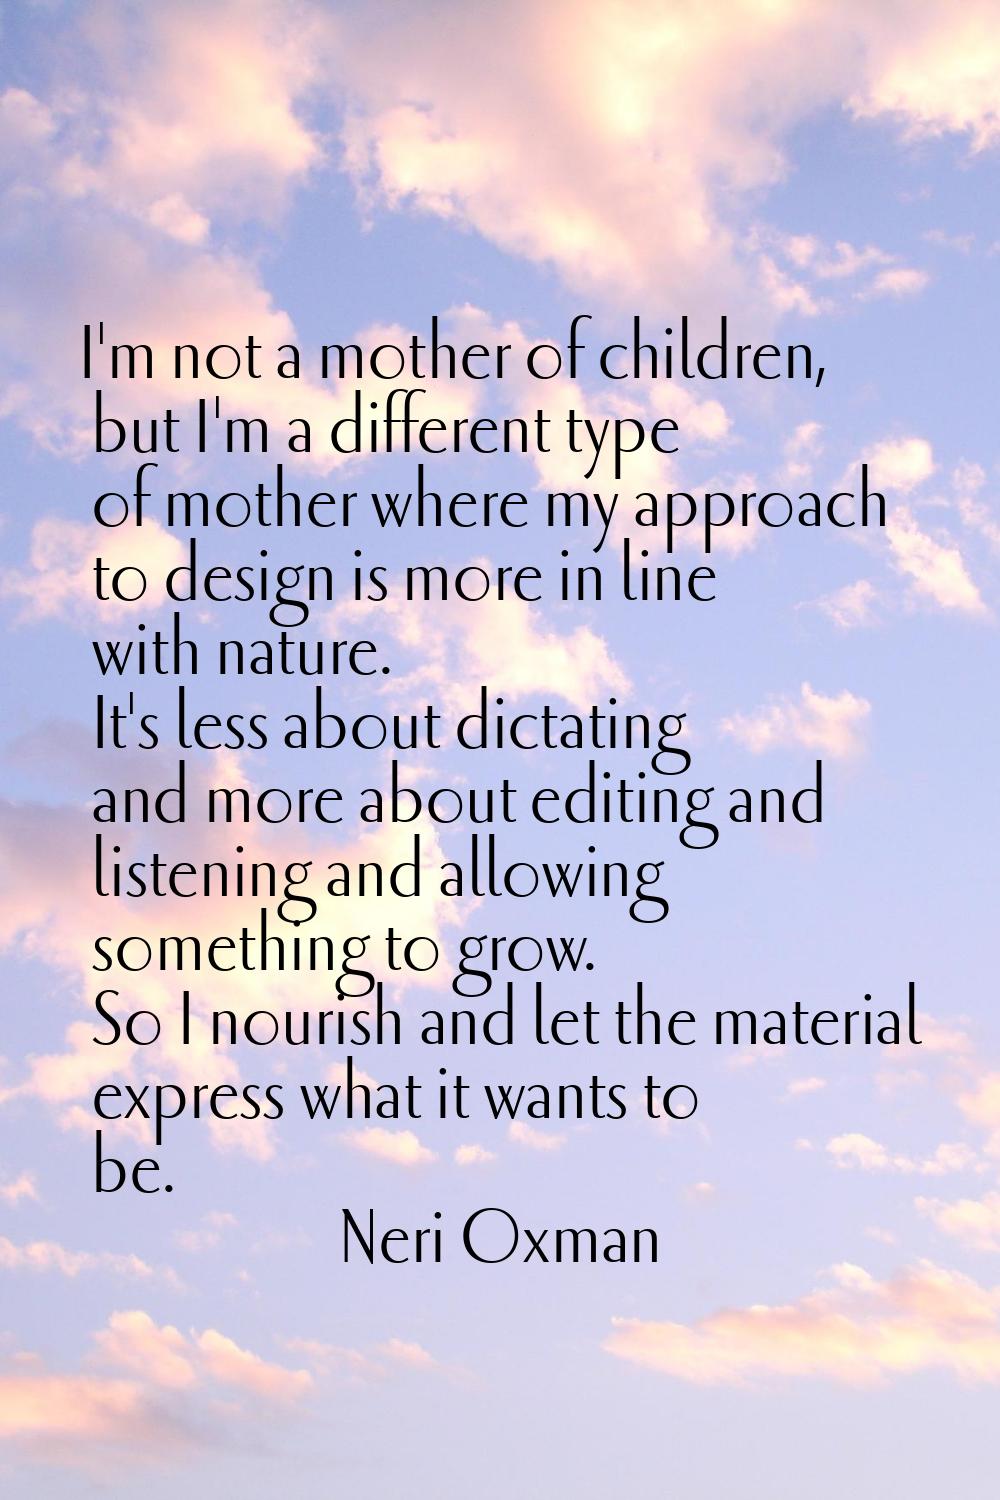 I'm not a mother of children, but I'm a different type of mother where my approach to design is mor